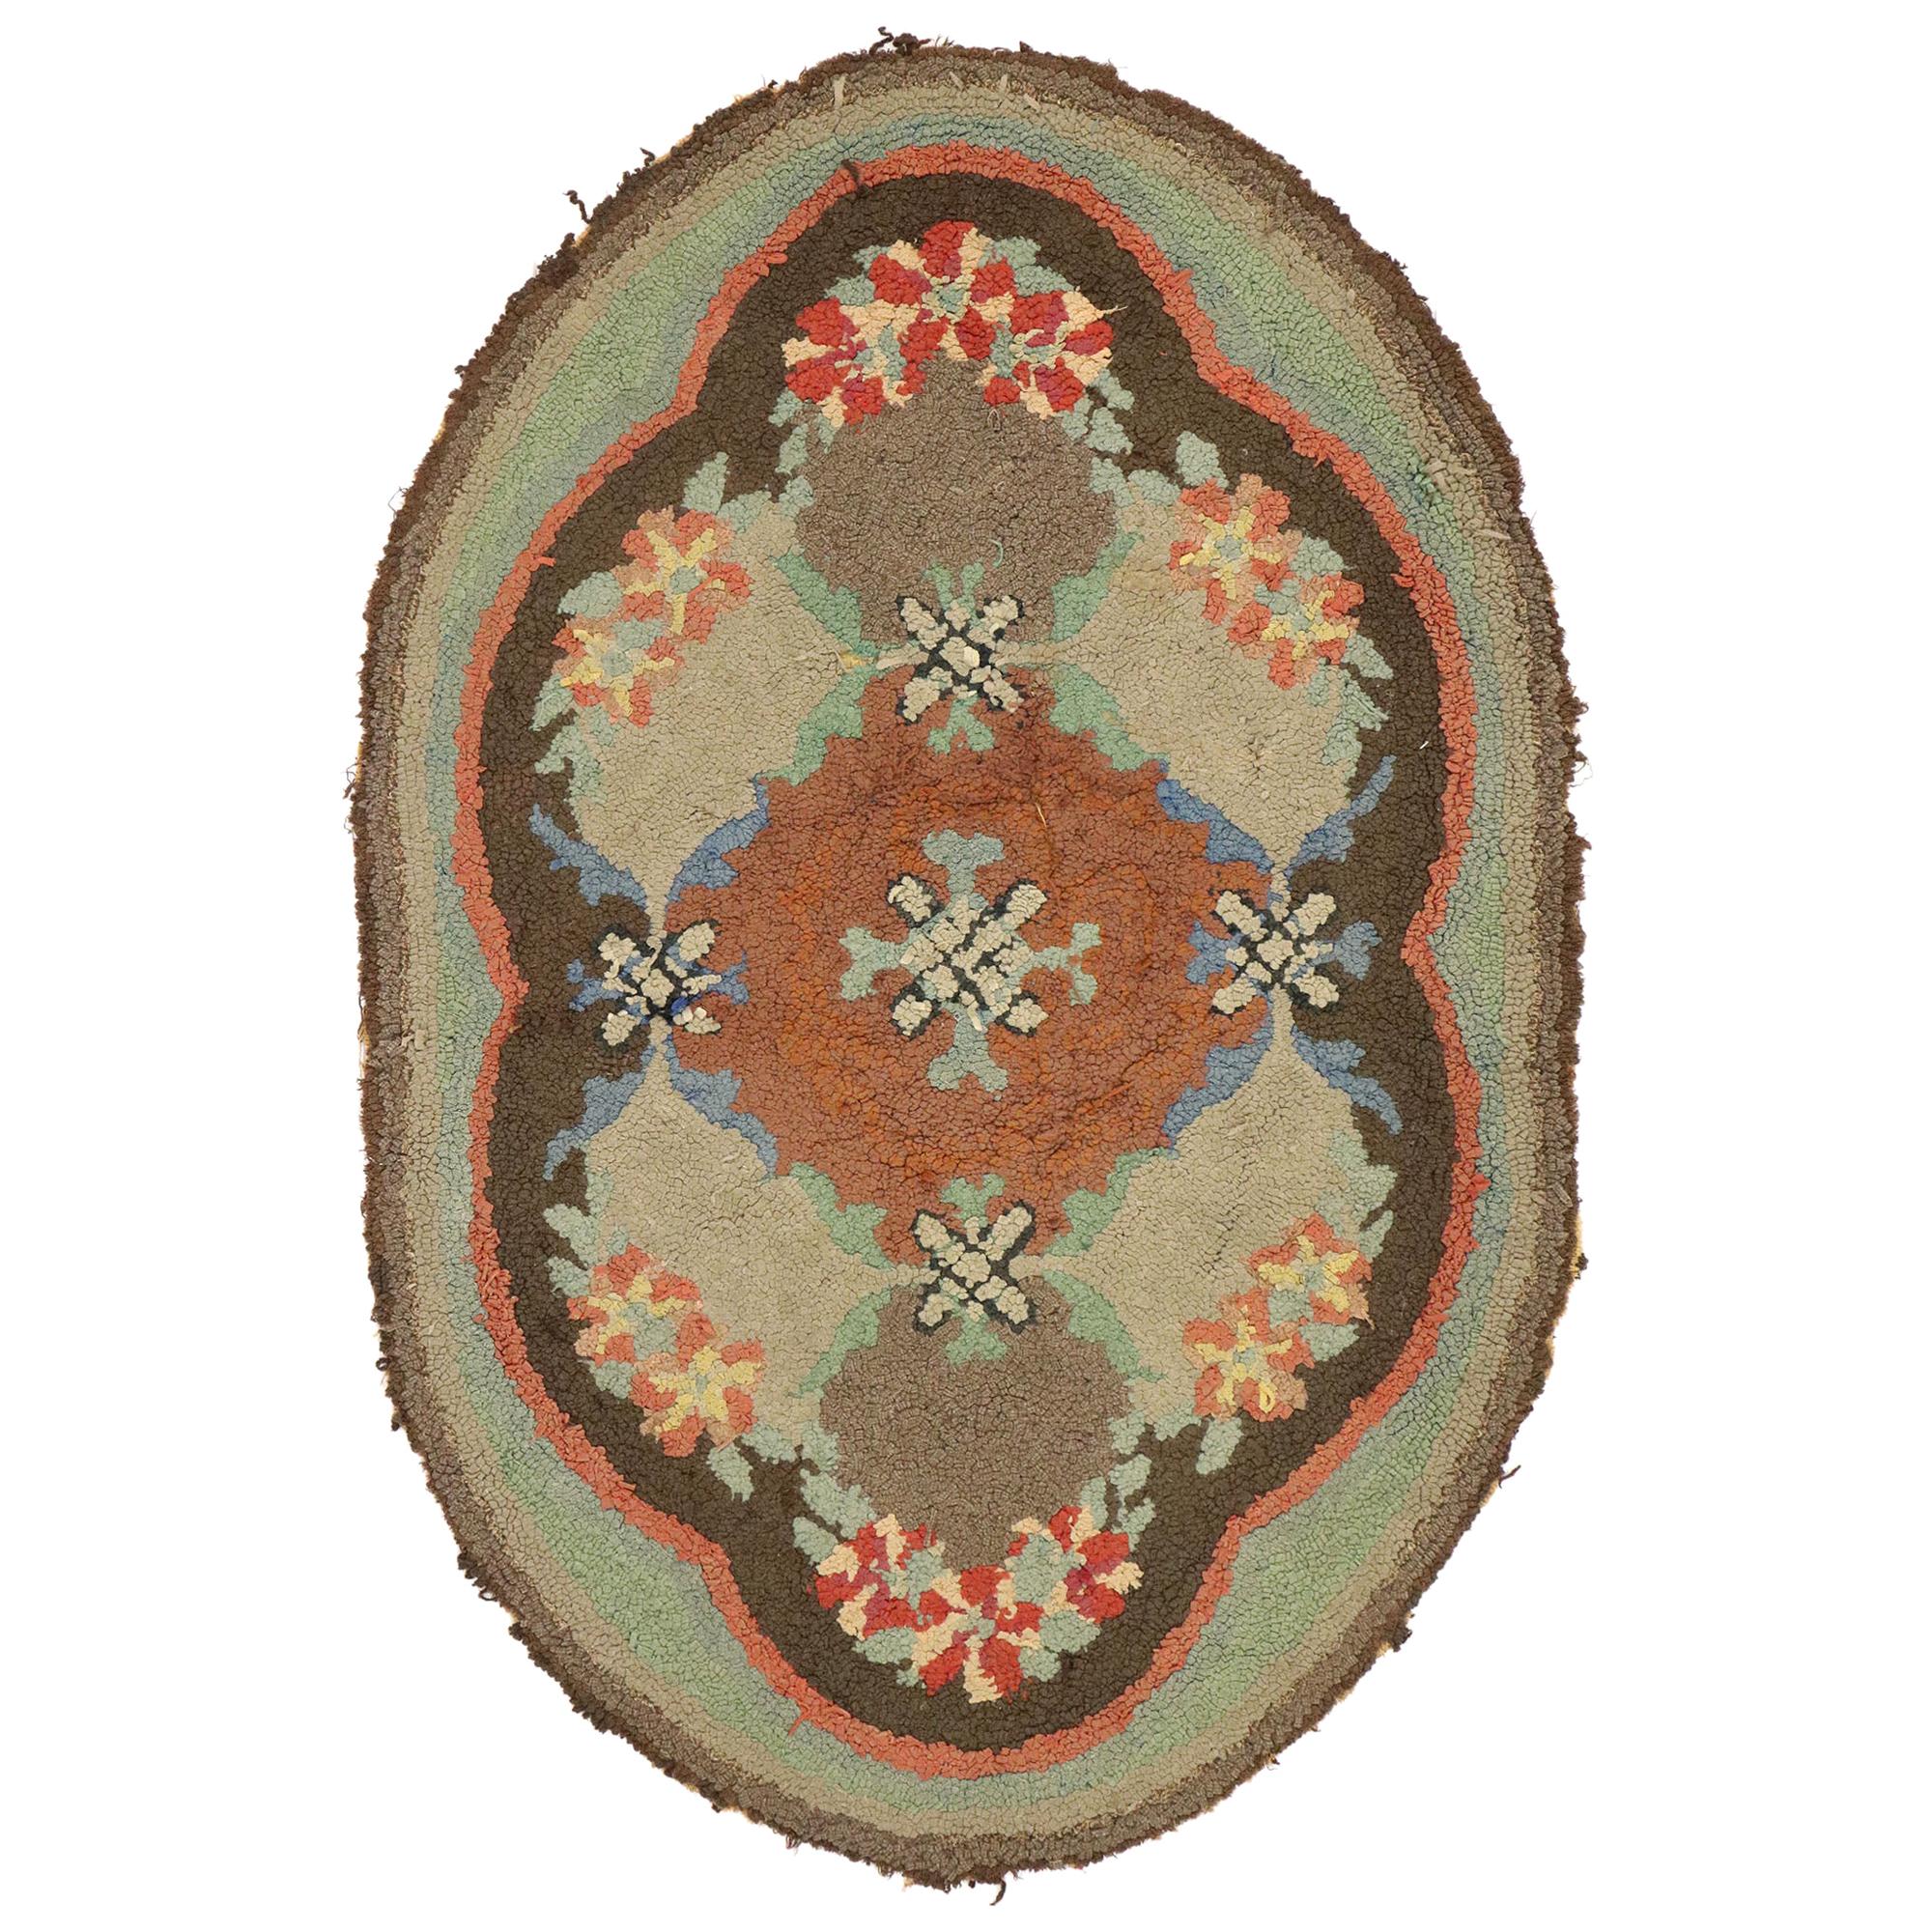 Distressed Antique American Hooked Oval Rug with American Colonial Style